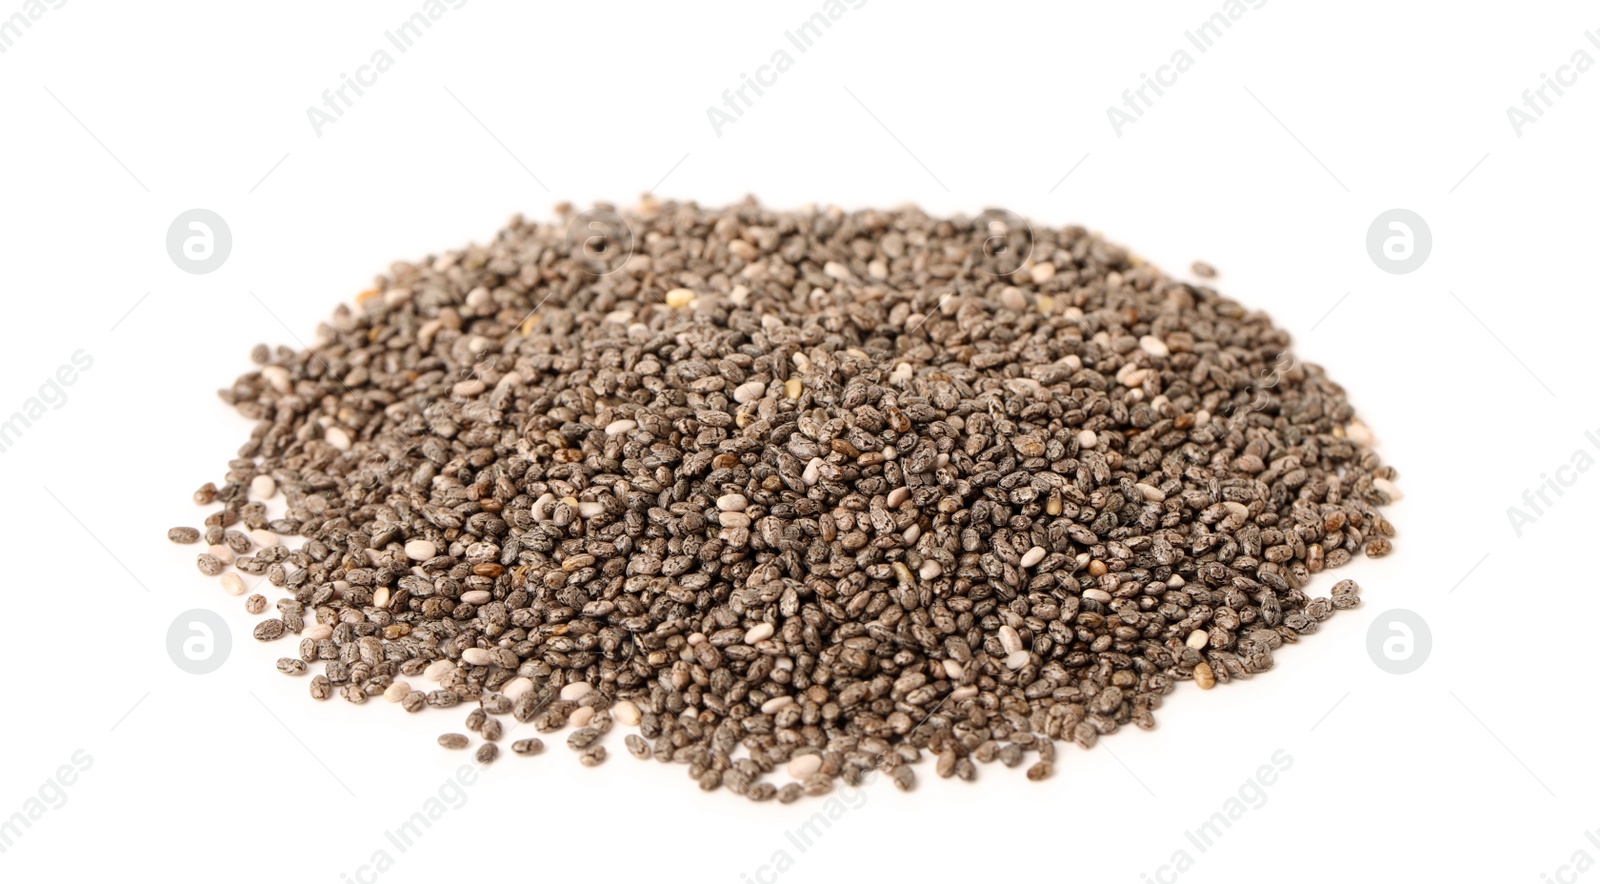 Photo of Pile of chia seeds on white background. Vegetable planting